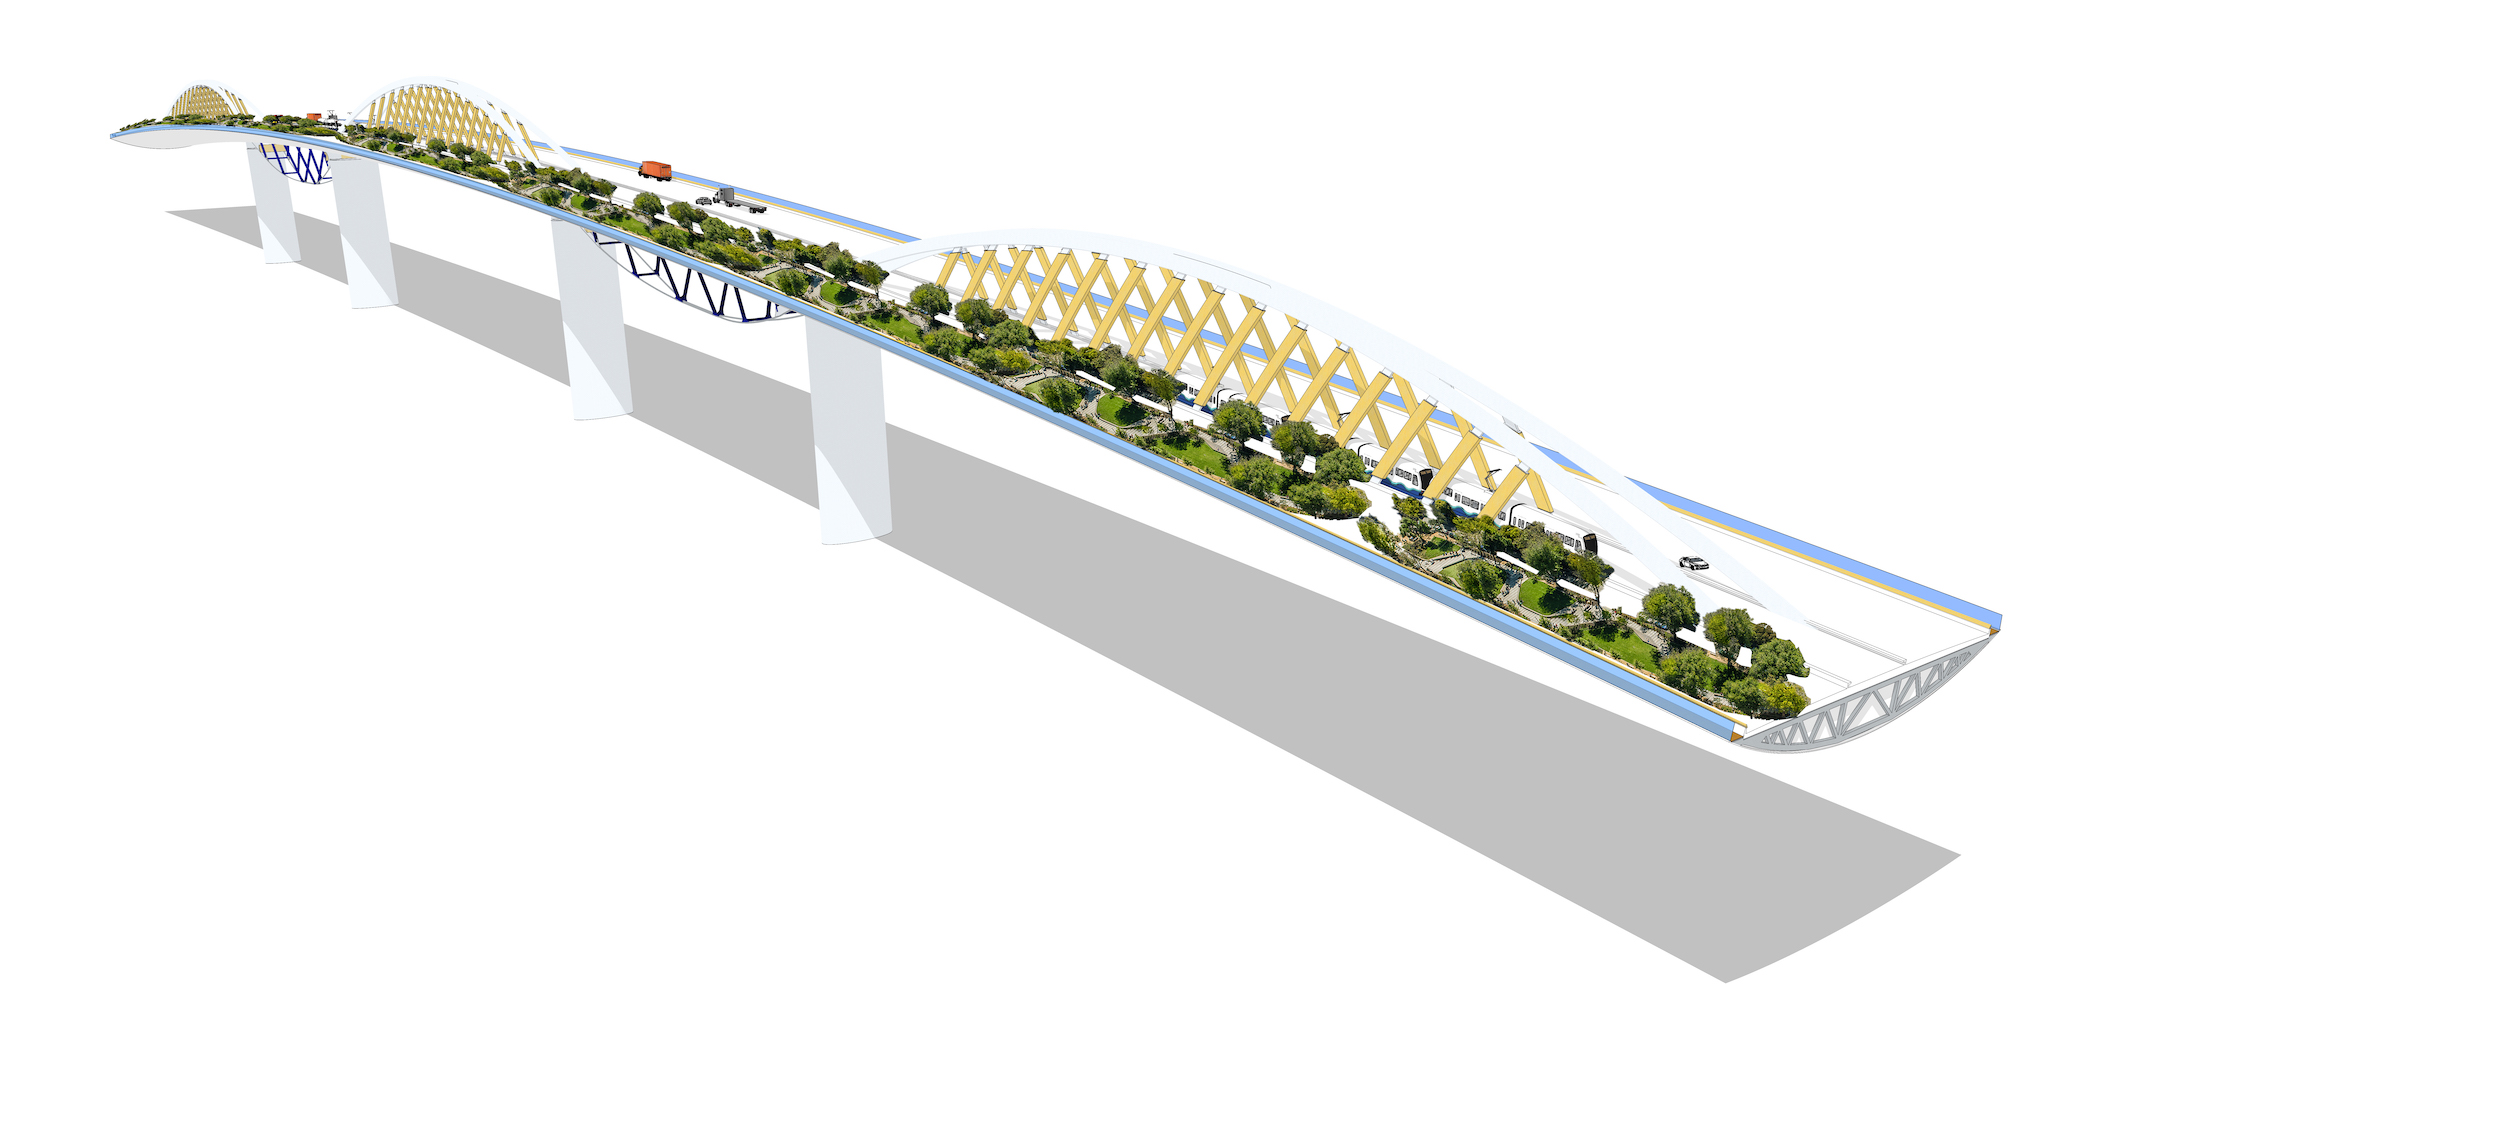 illustration of a proposed west seattle bridge replacement with a park element